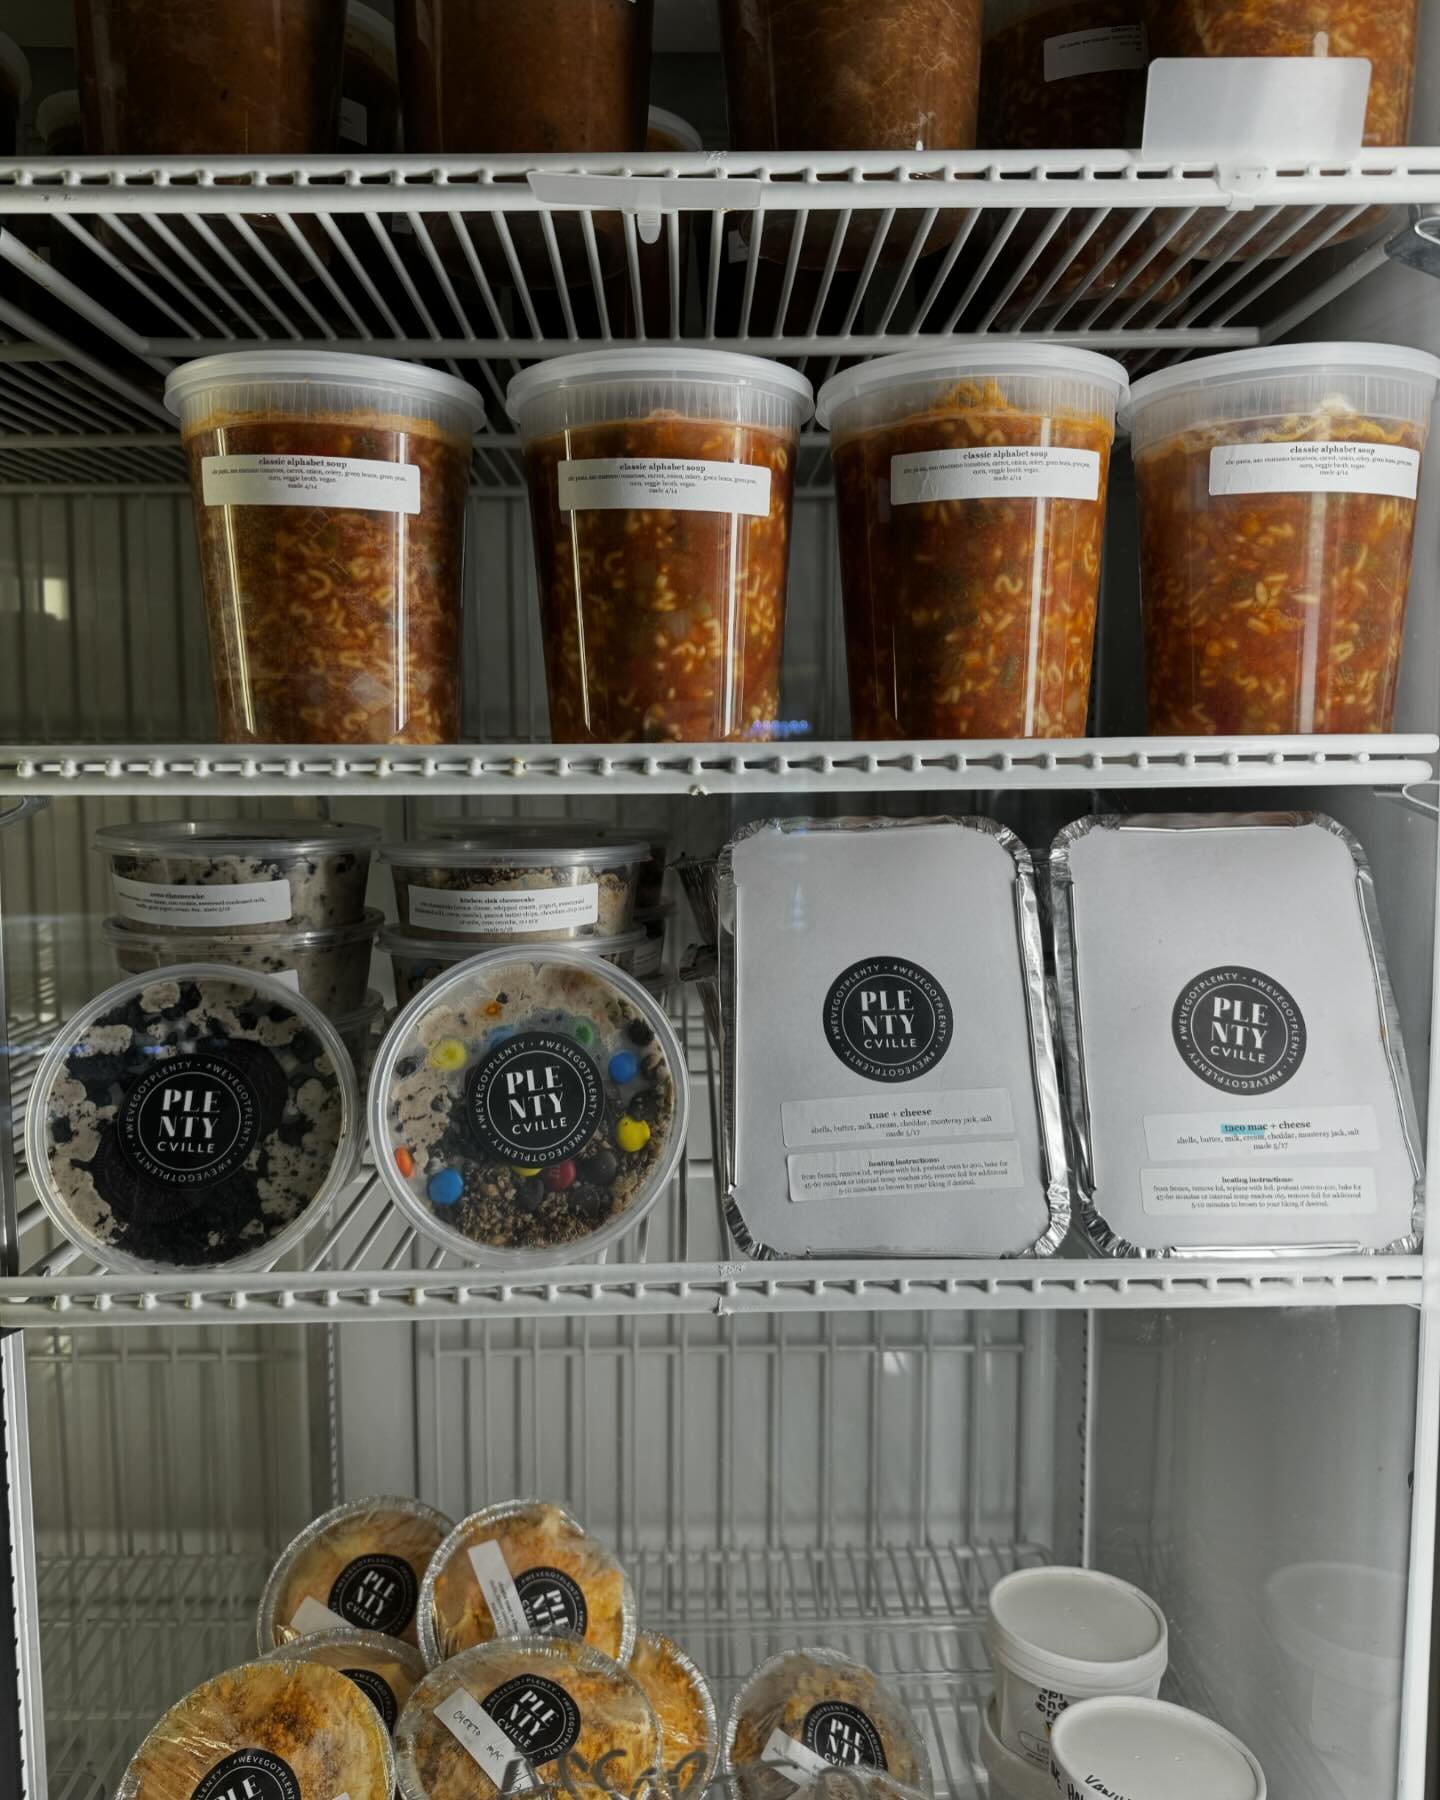 heads up! it&rsquo;s the last day of our freezer soup sale! all frozen soups are only $10. plus our fresh case is fully stocked with every thing from the most recent menu and more! stop by today and stock up for the week. we&rsquo;re open 11-5 today.